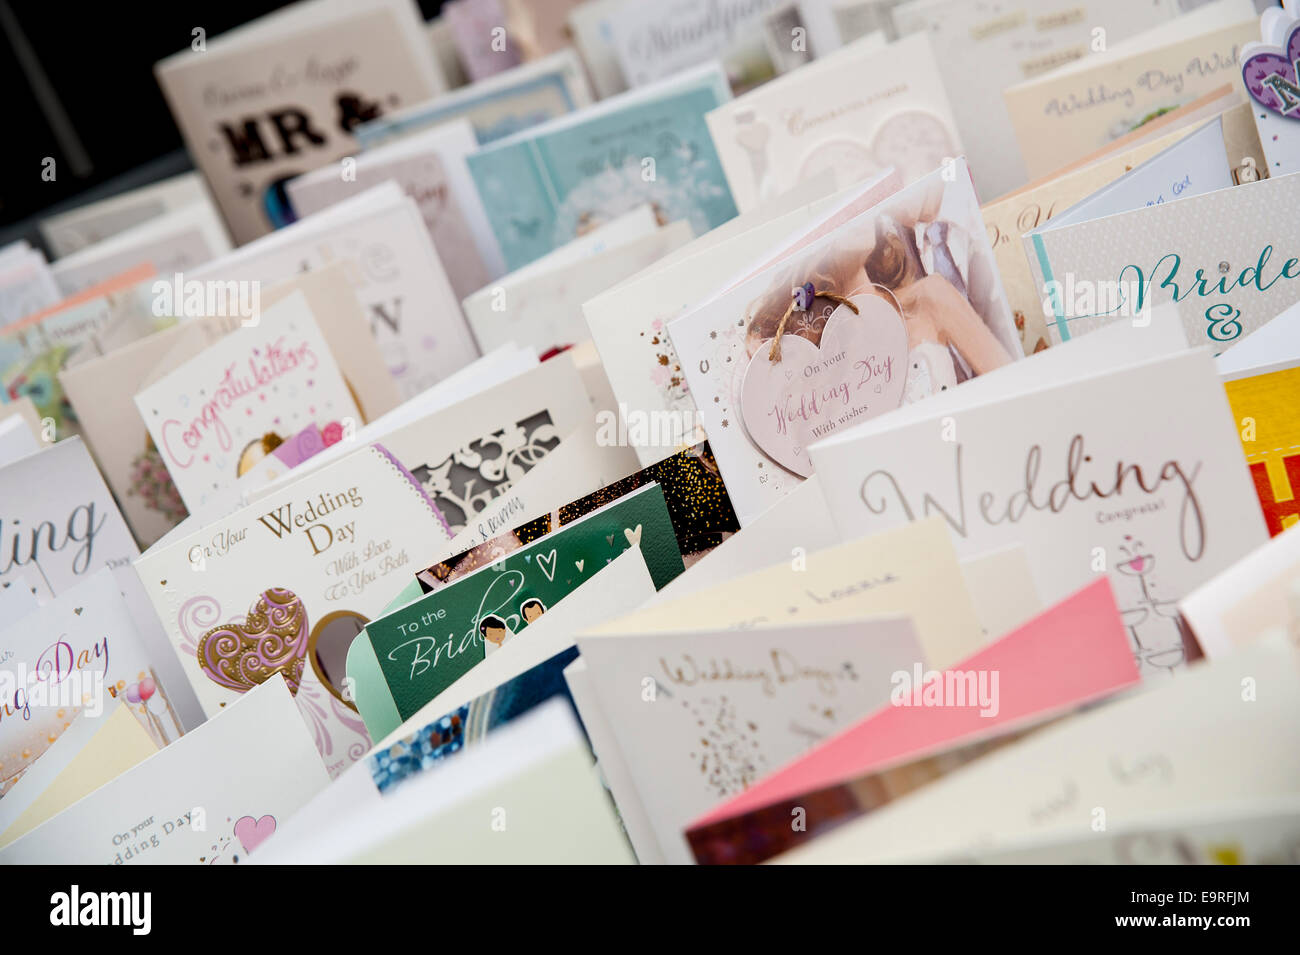 Wedding congratulating cards stood up on a table after a wedding. Stock Photo